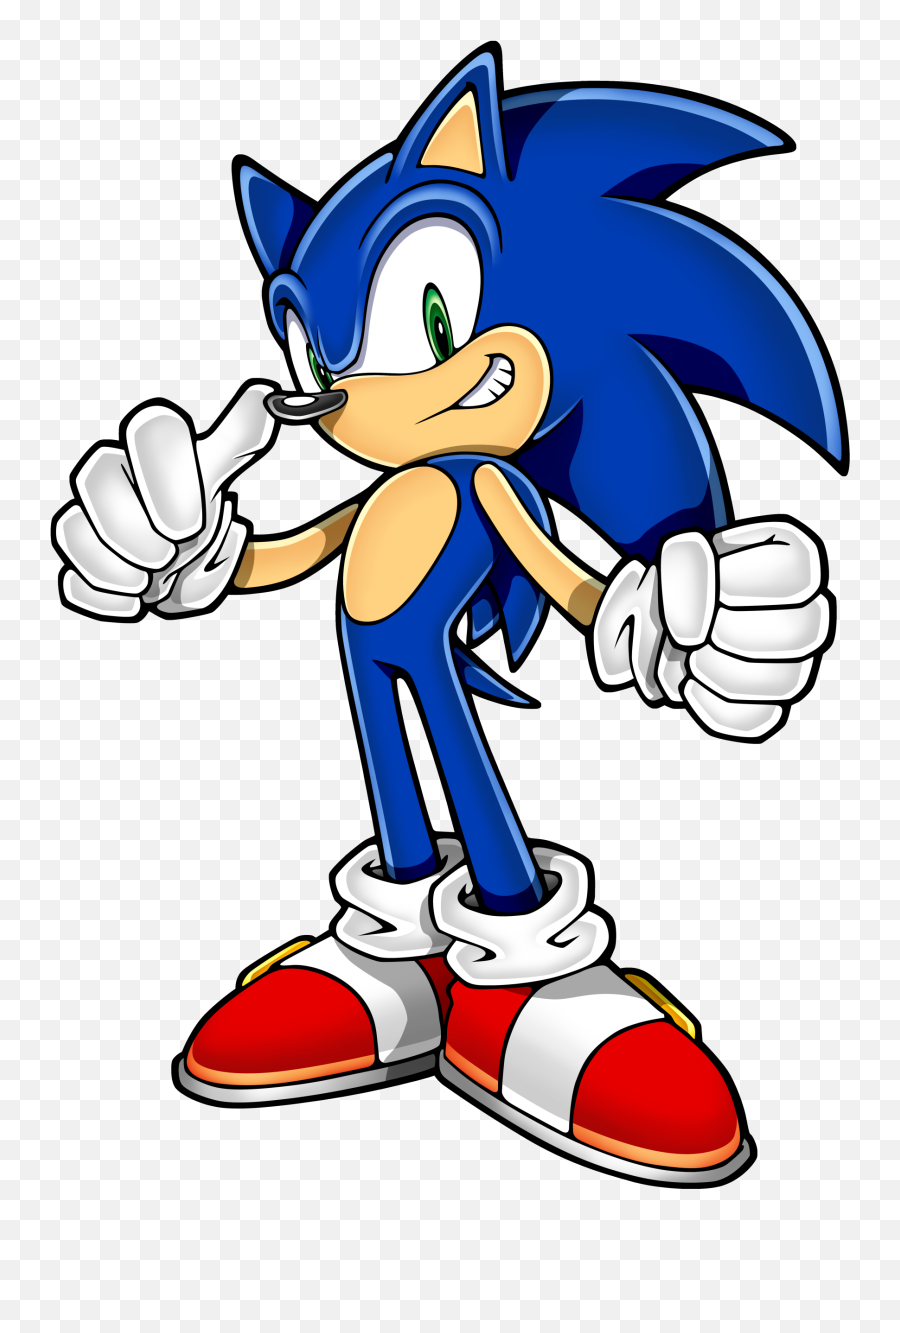 Why Is Sonic So Fast - Cartoon Sonic The Hedgehog Png,Sonic Running Png